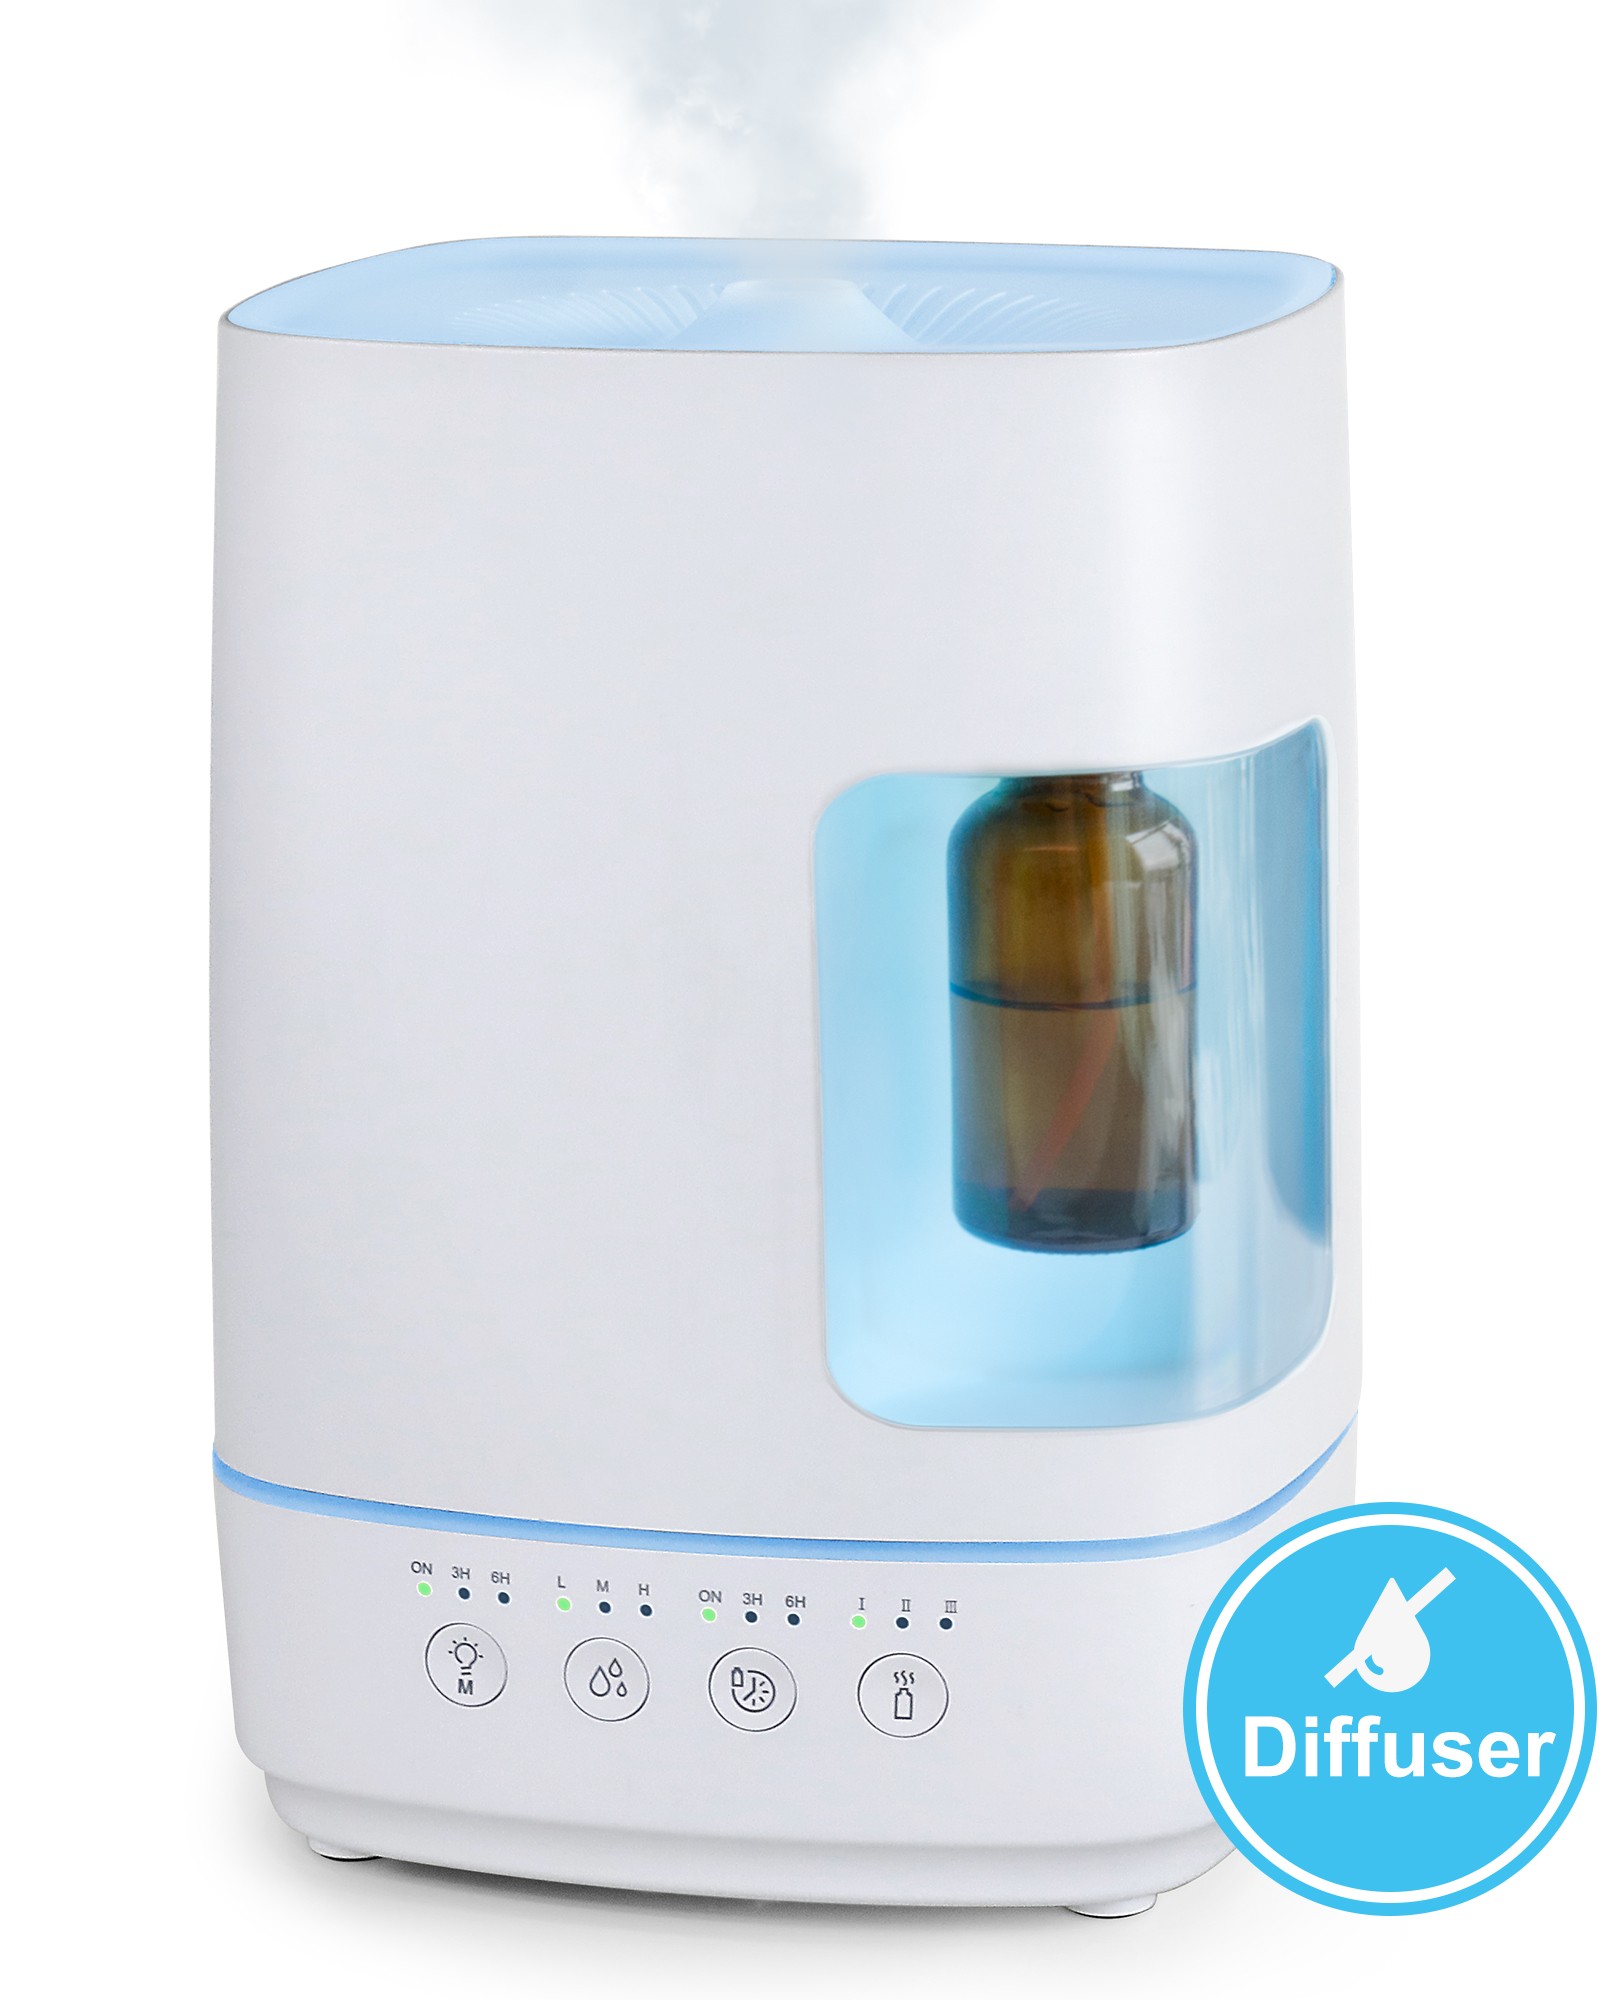 Puraeo 3 in 1 Aroma Humidifier Aromatherapy Diffusers